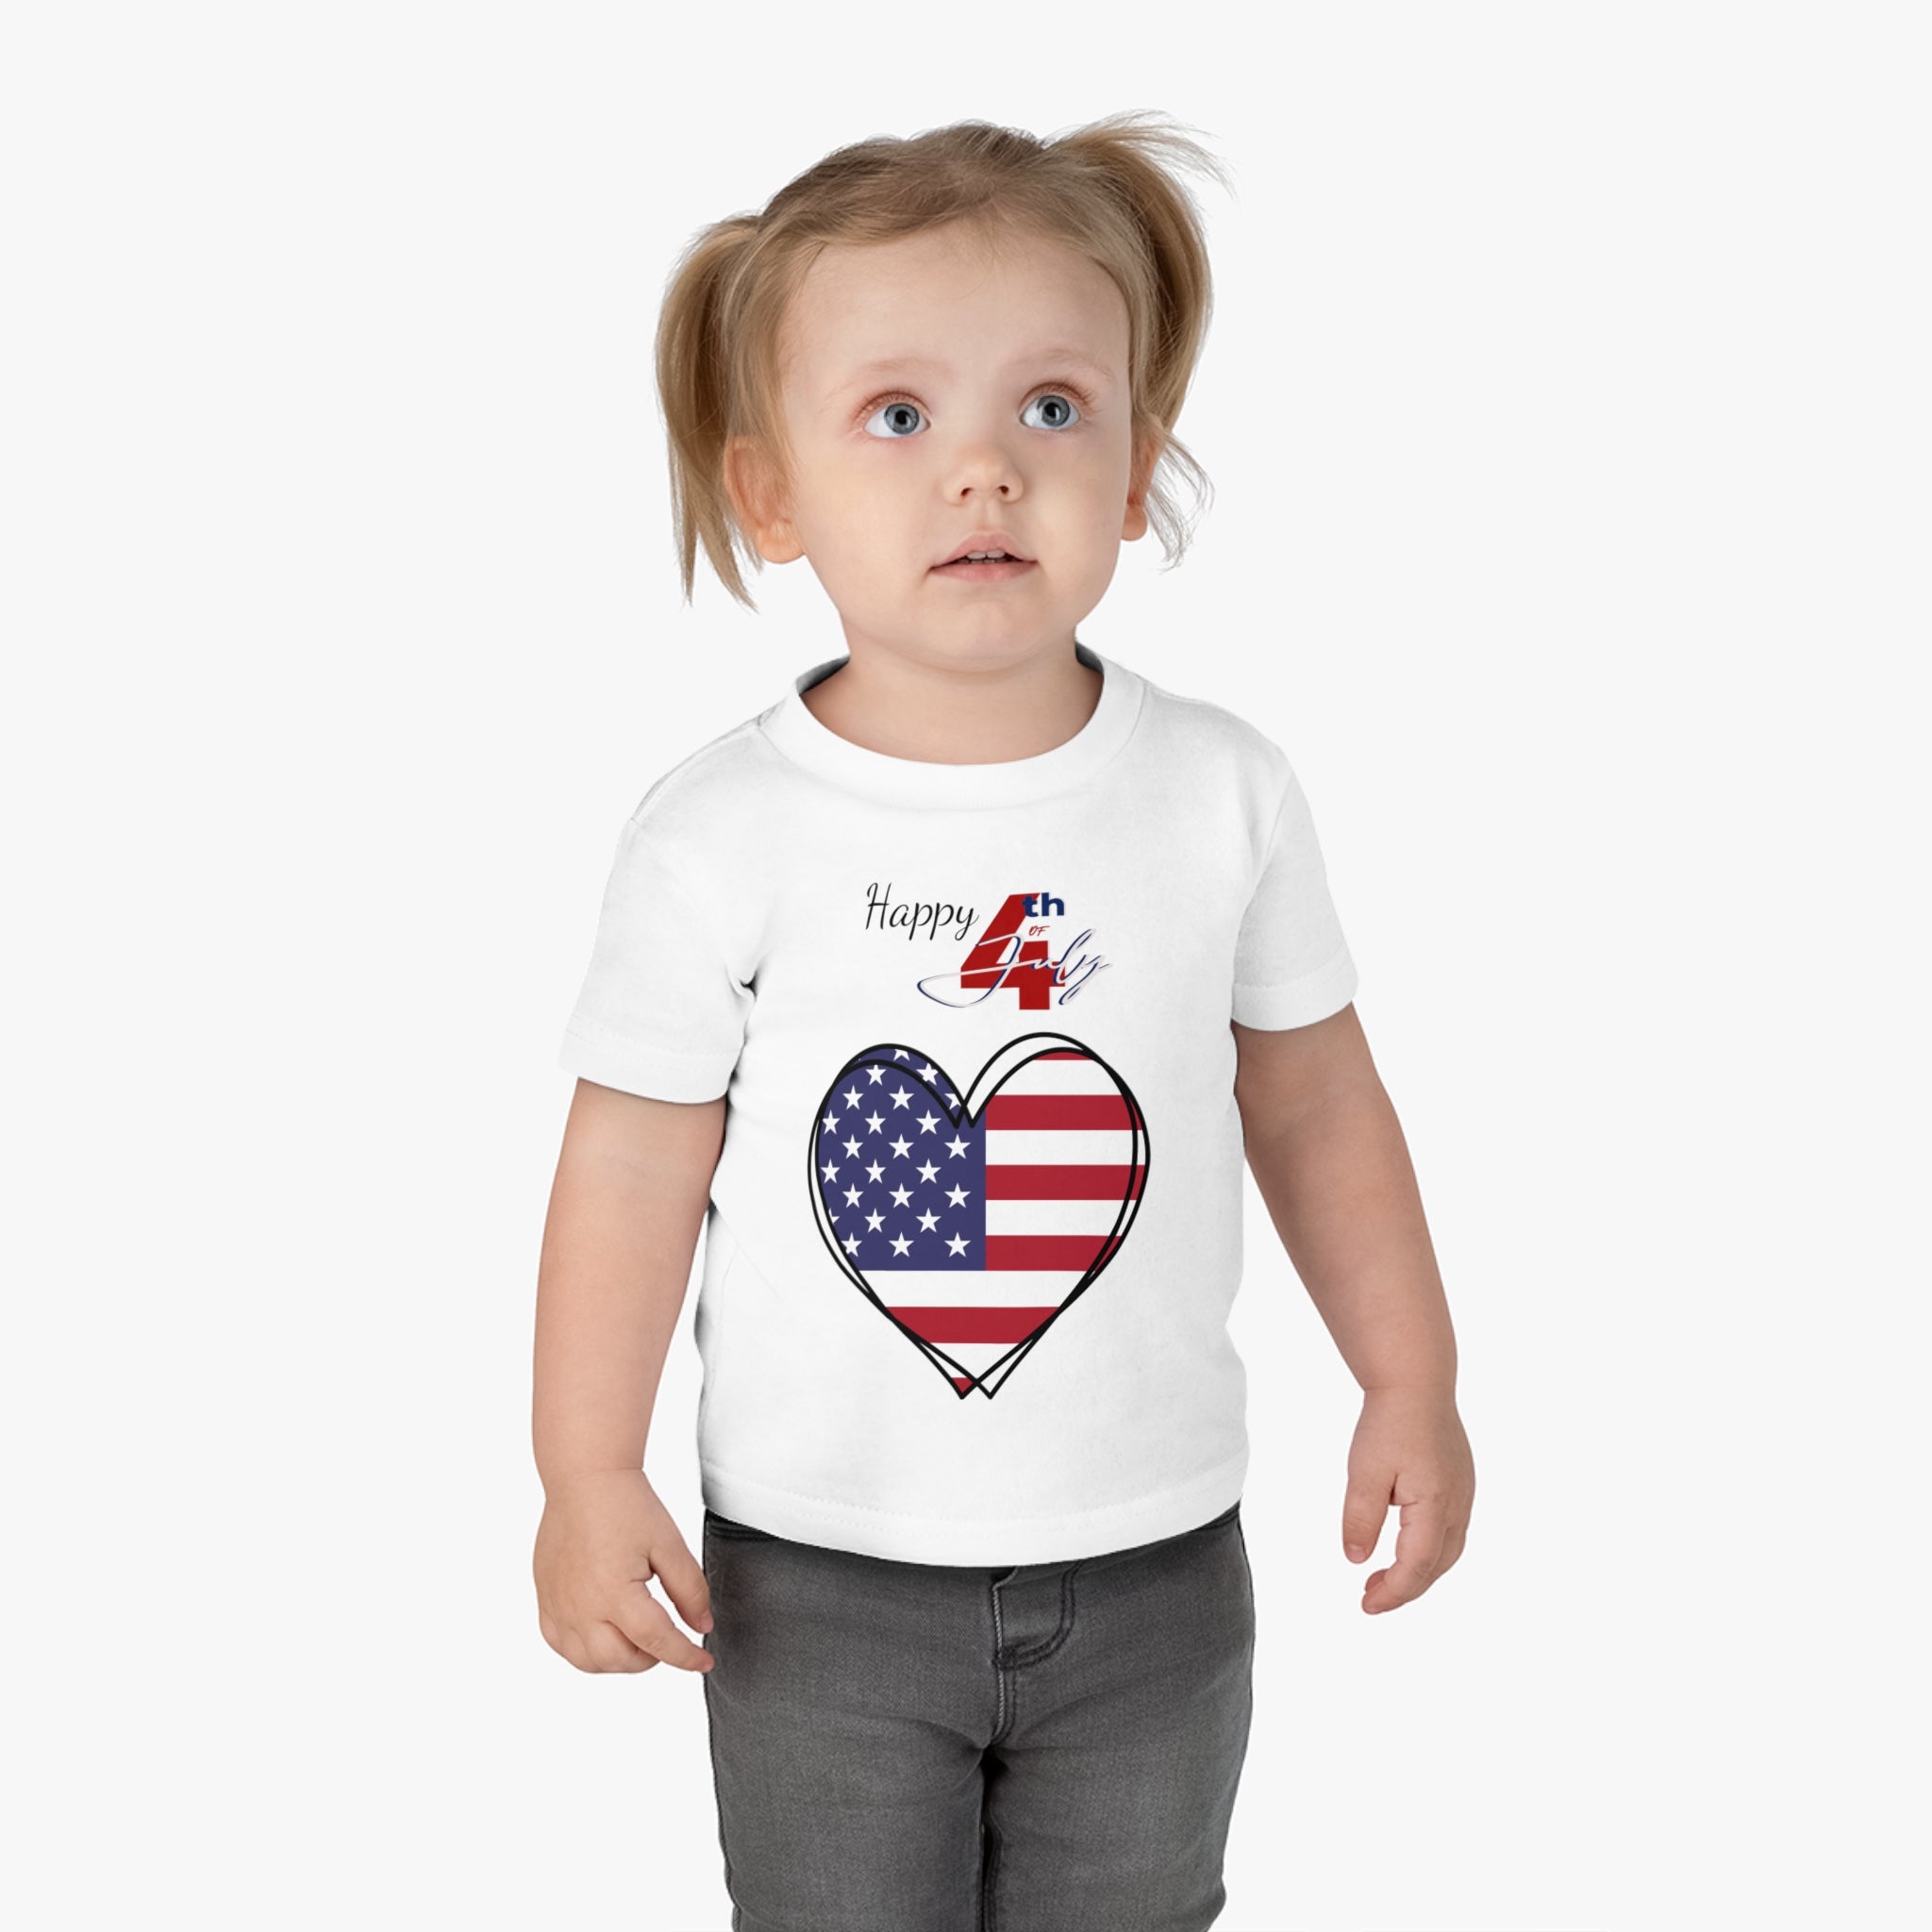 Happy 4th of July American Flag Big Heart design Infant Shirt, Baby Tee, Infant Tee